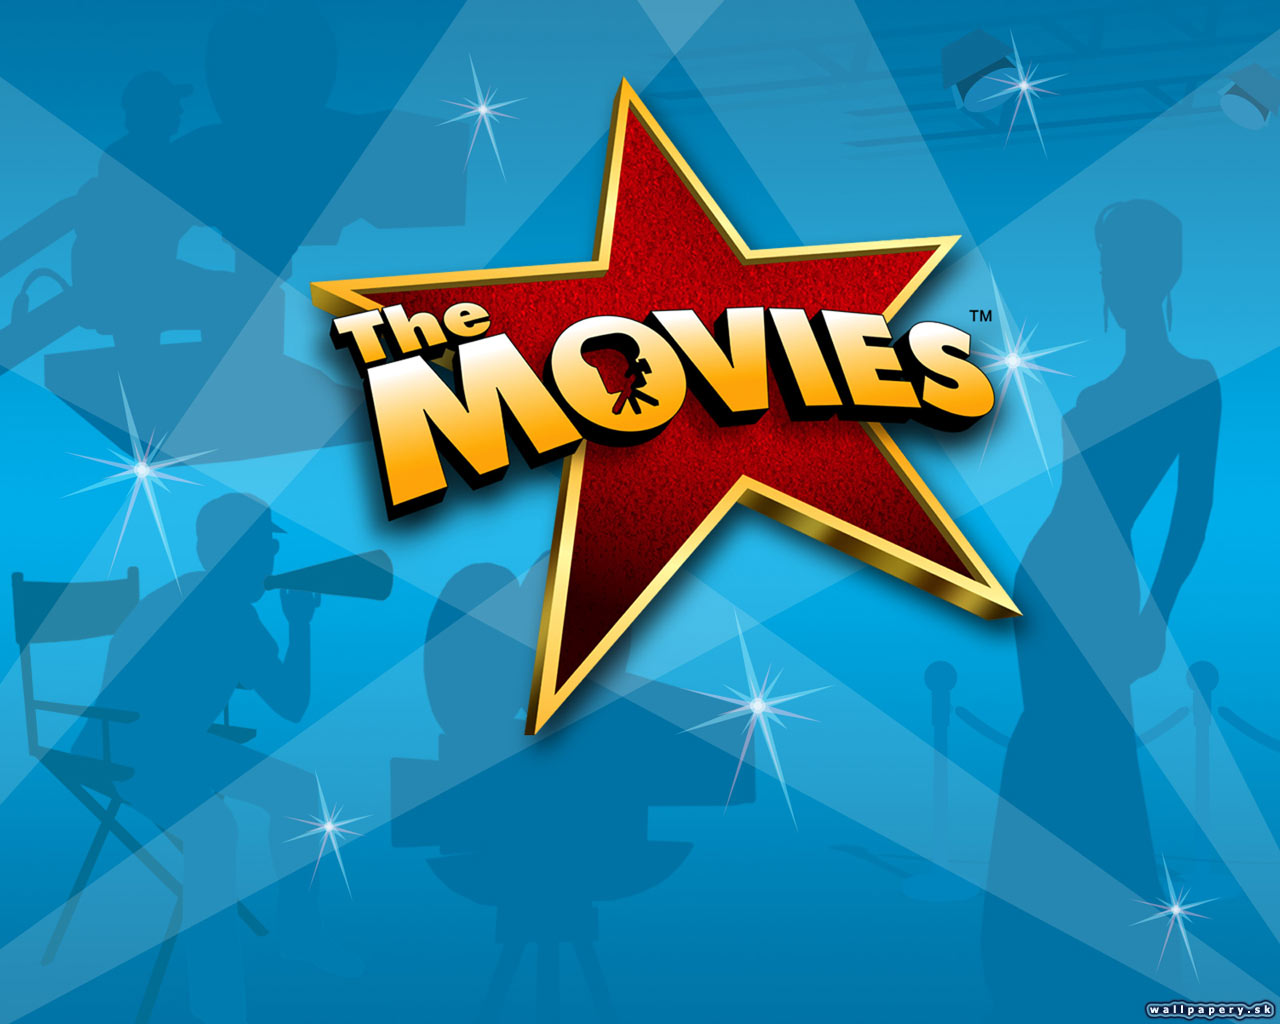 The Movies - wallpaper 9